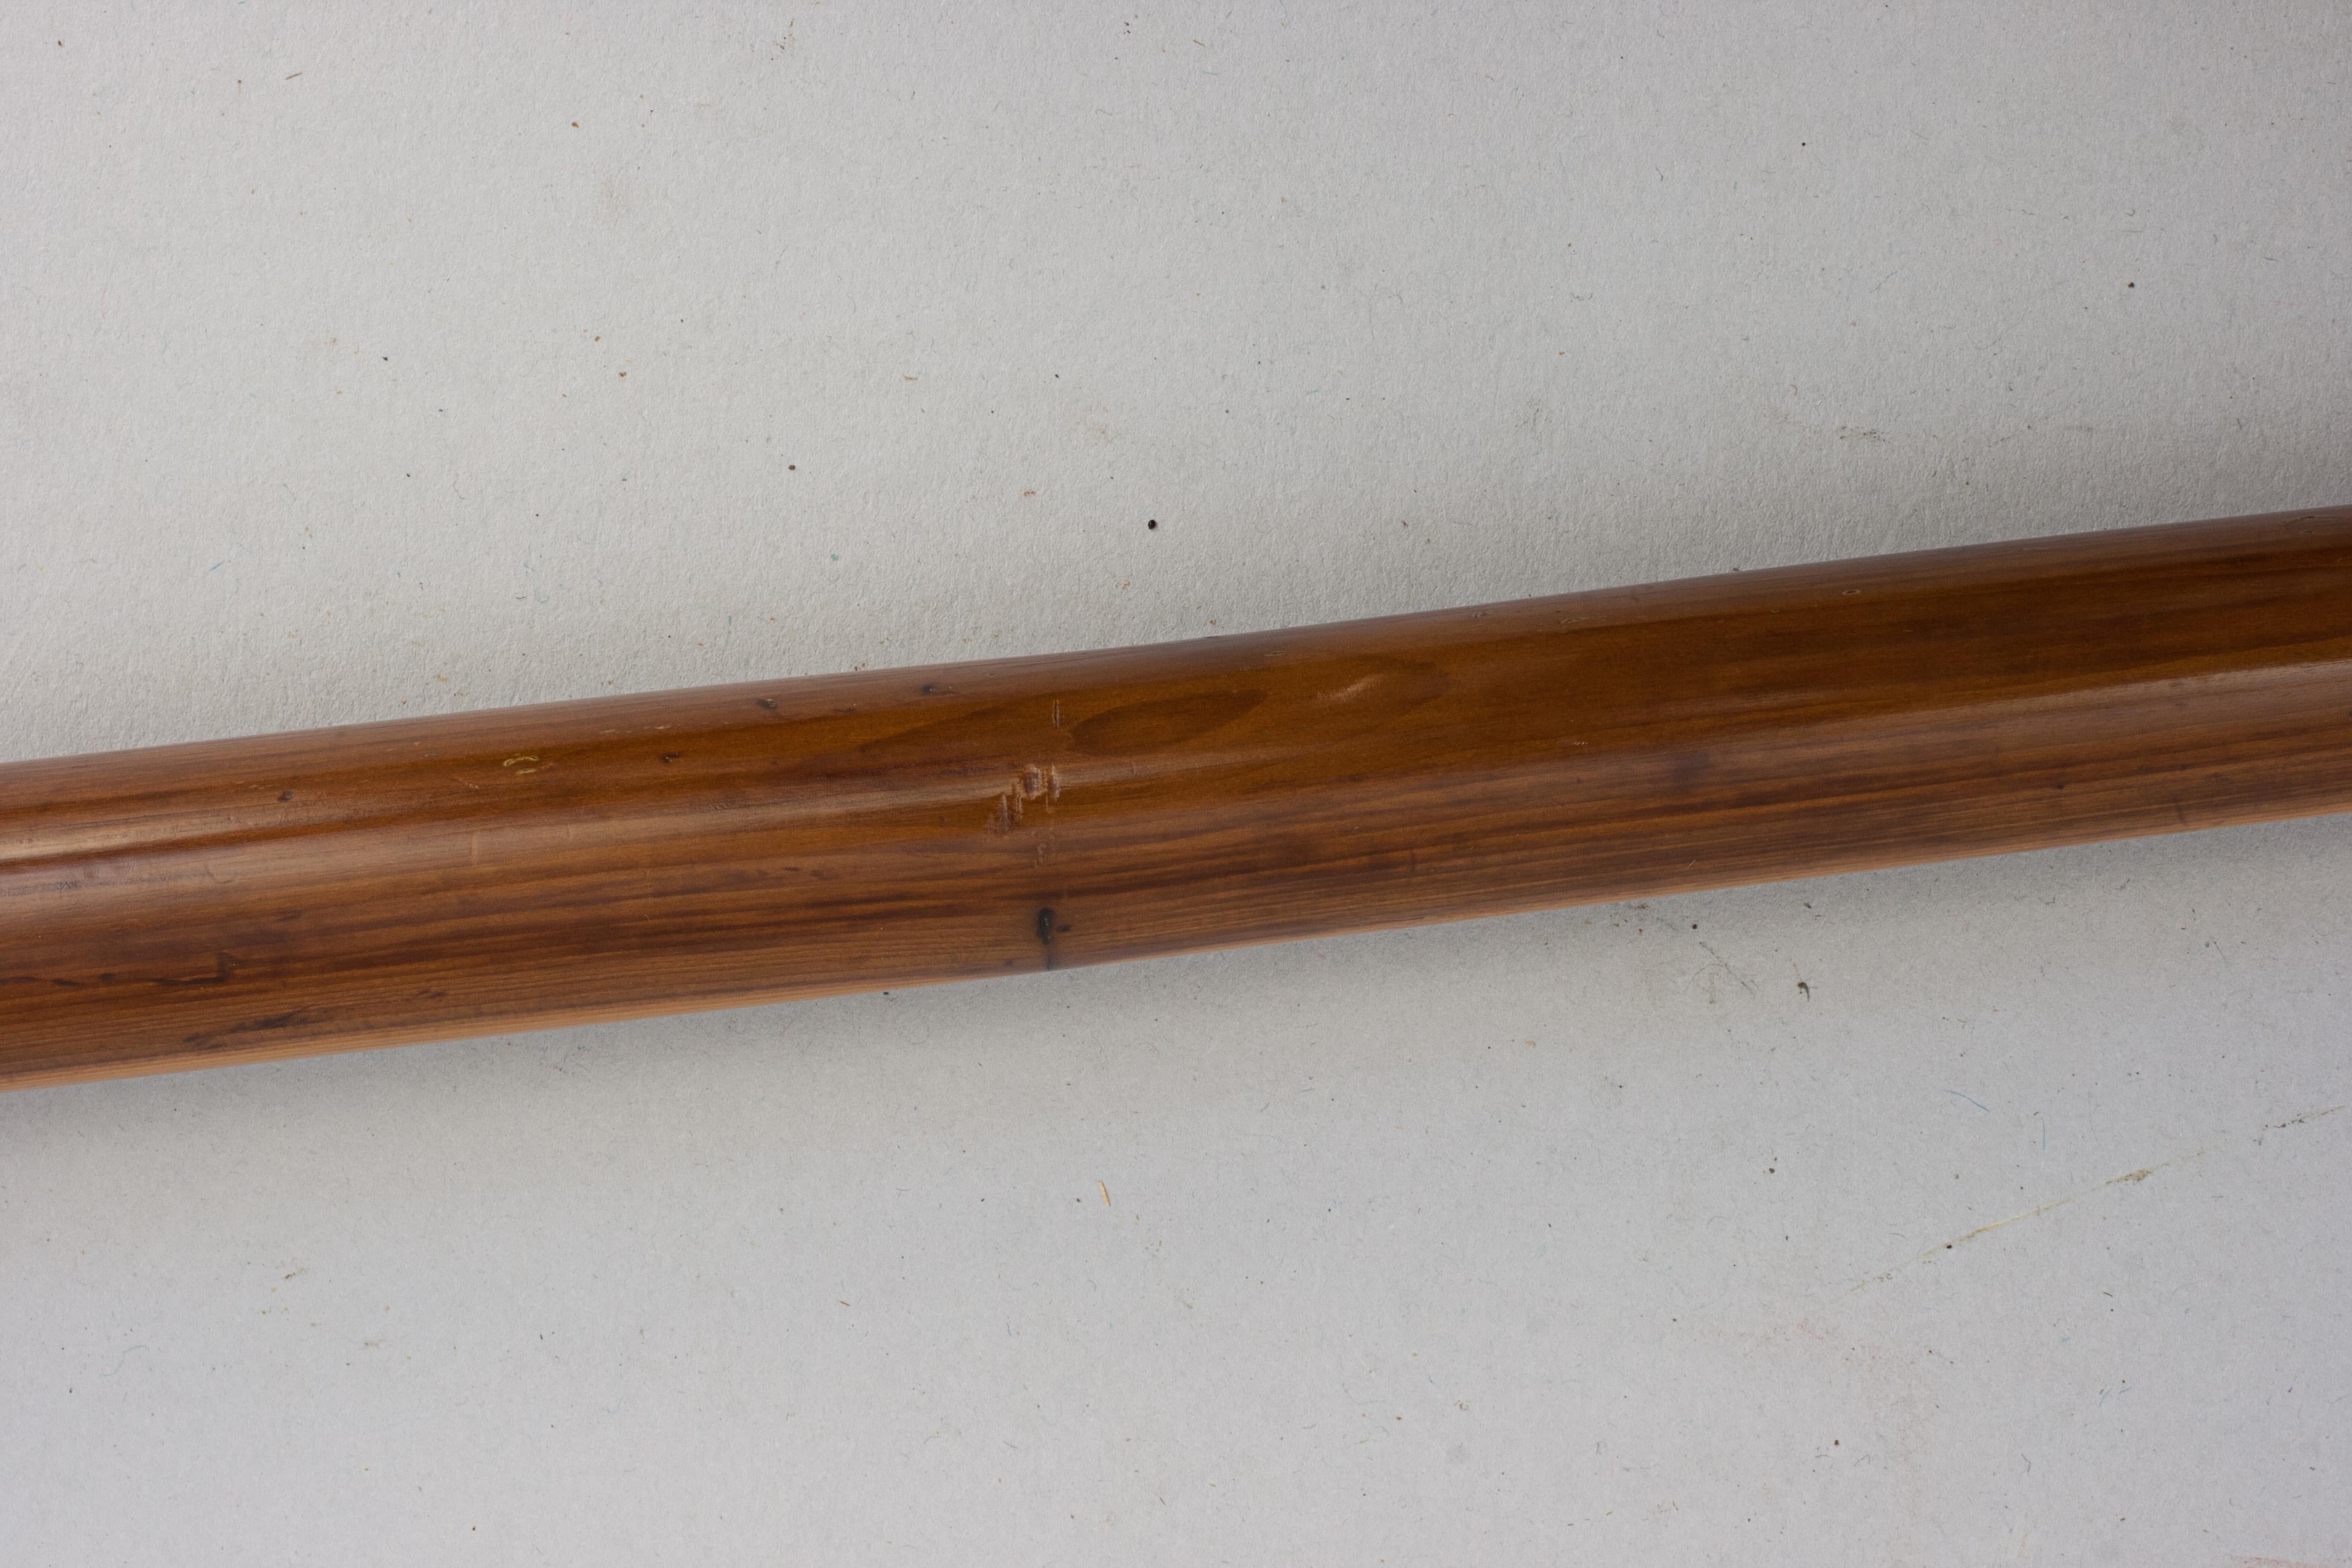 Vintage Archery Longbow by Thomas Aldred 2